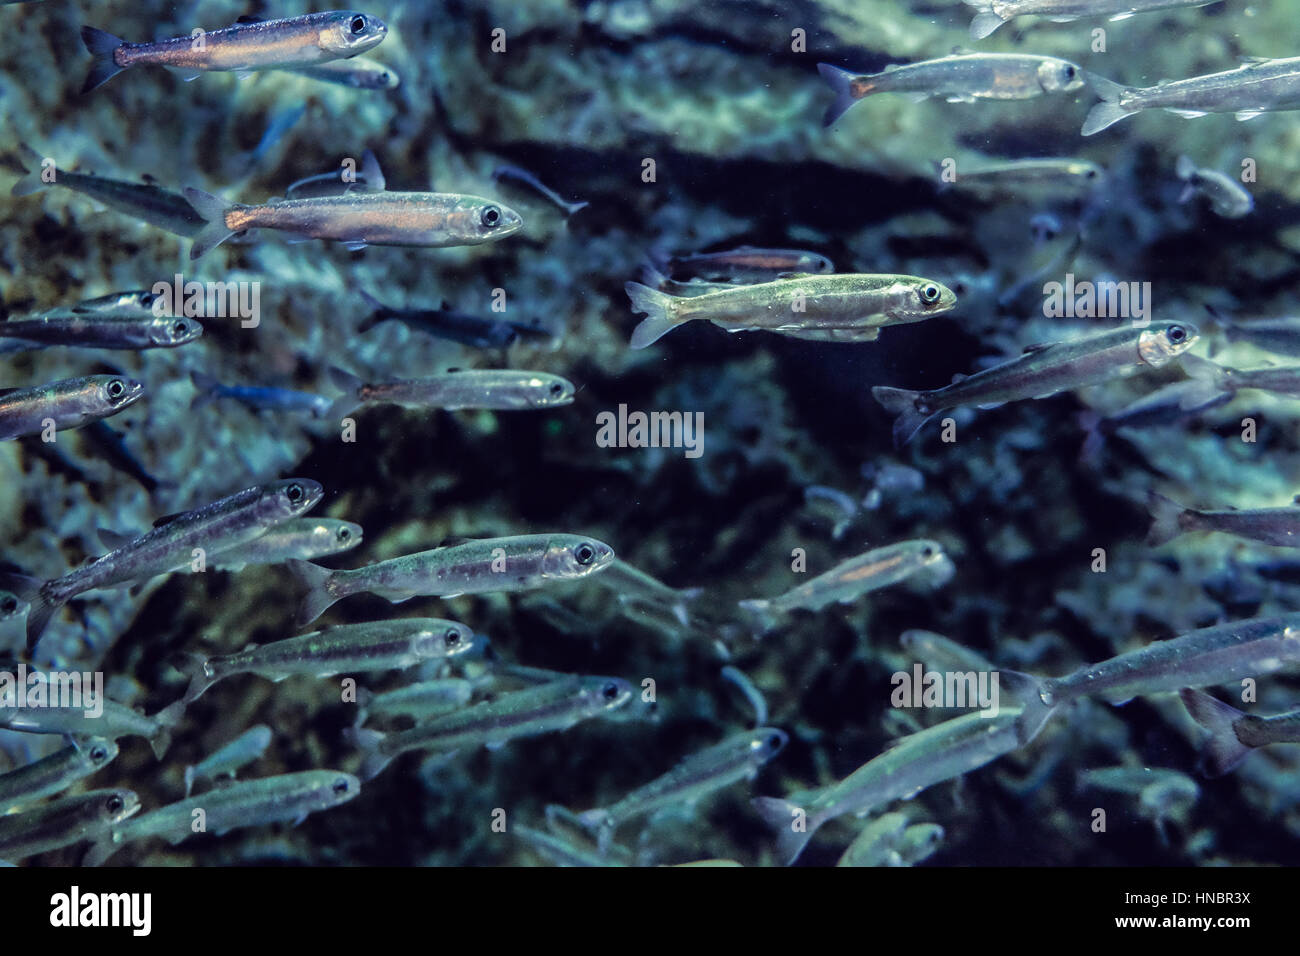 Many small salmon fish, underwater view, age 8 - 12 months Stock Photo